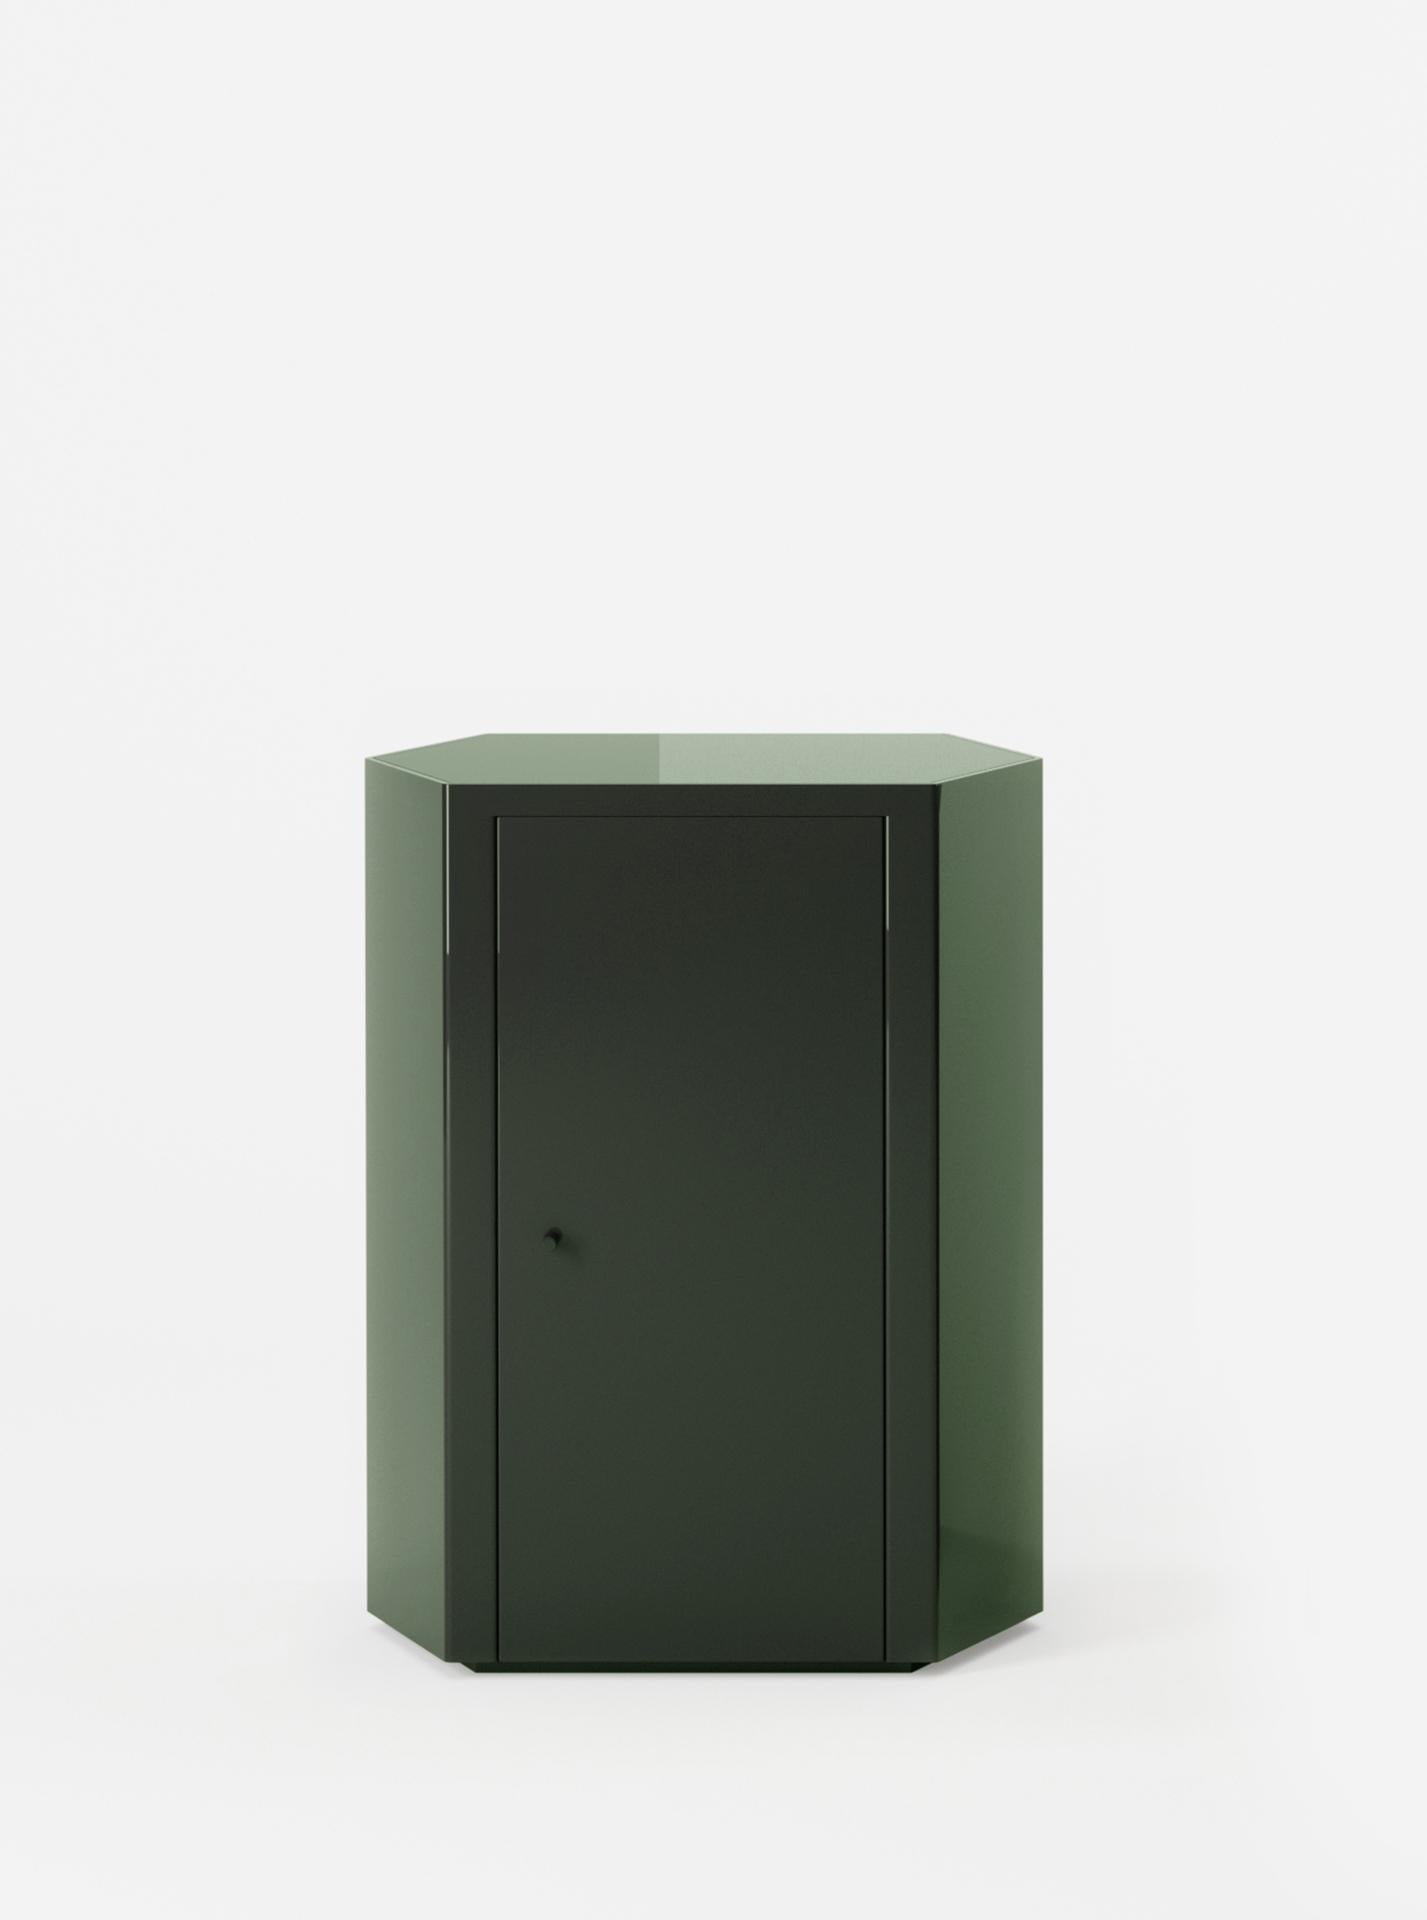 Minimalist Pair of Park Night Stands in Forest Green Lacquer by Yaniv Chen for Lemon For Sale